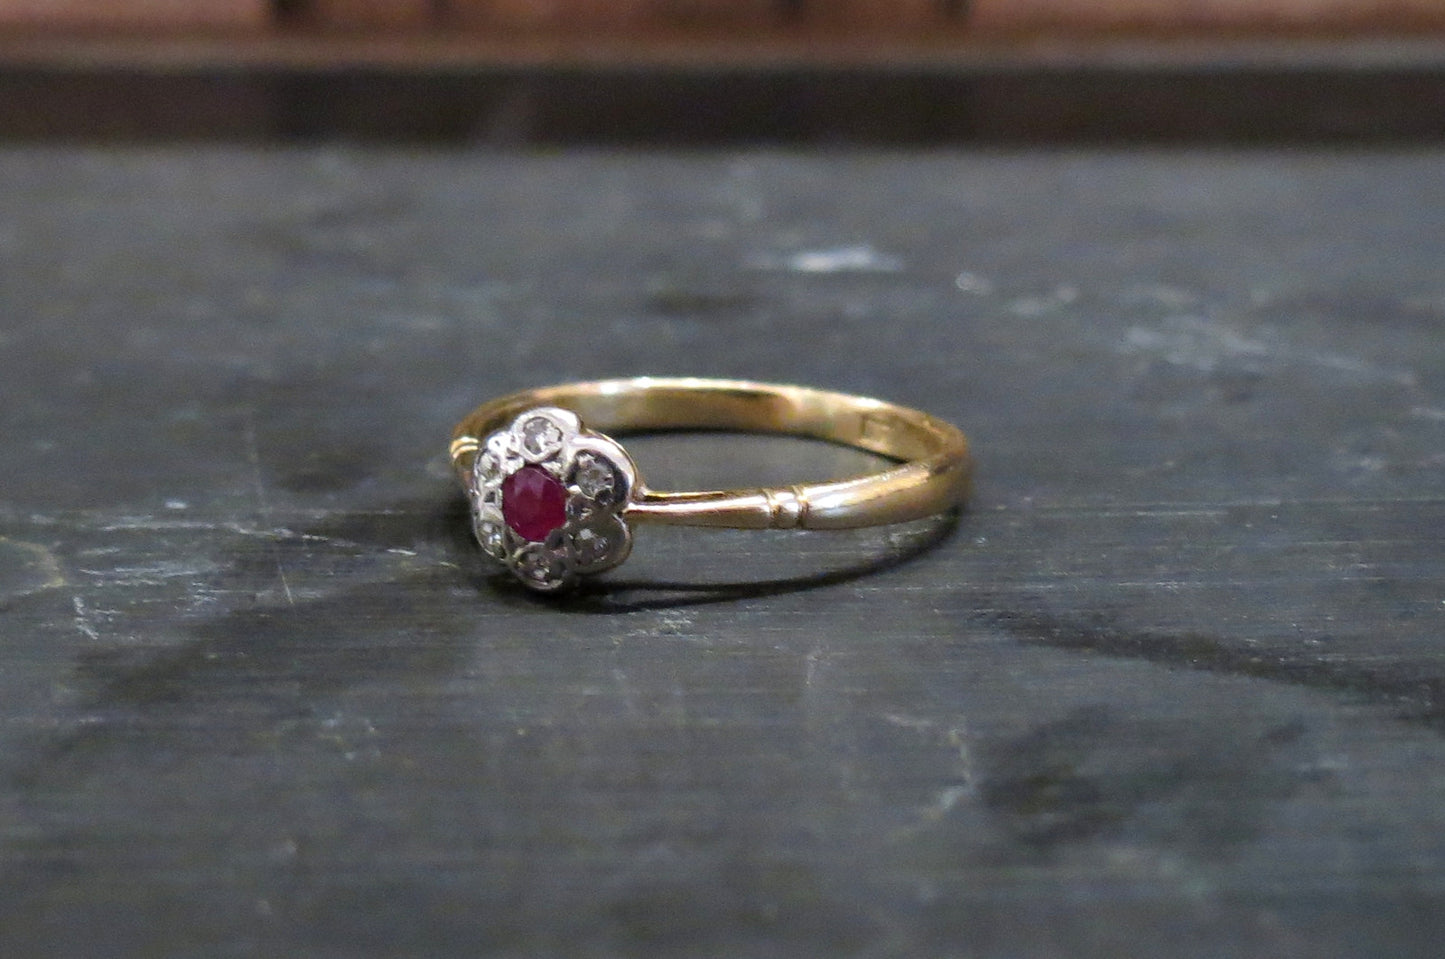 SOLD--Edwardian Ruby and Diamond Flower Ring Silver/18k c. 1900